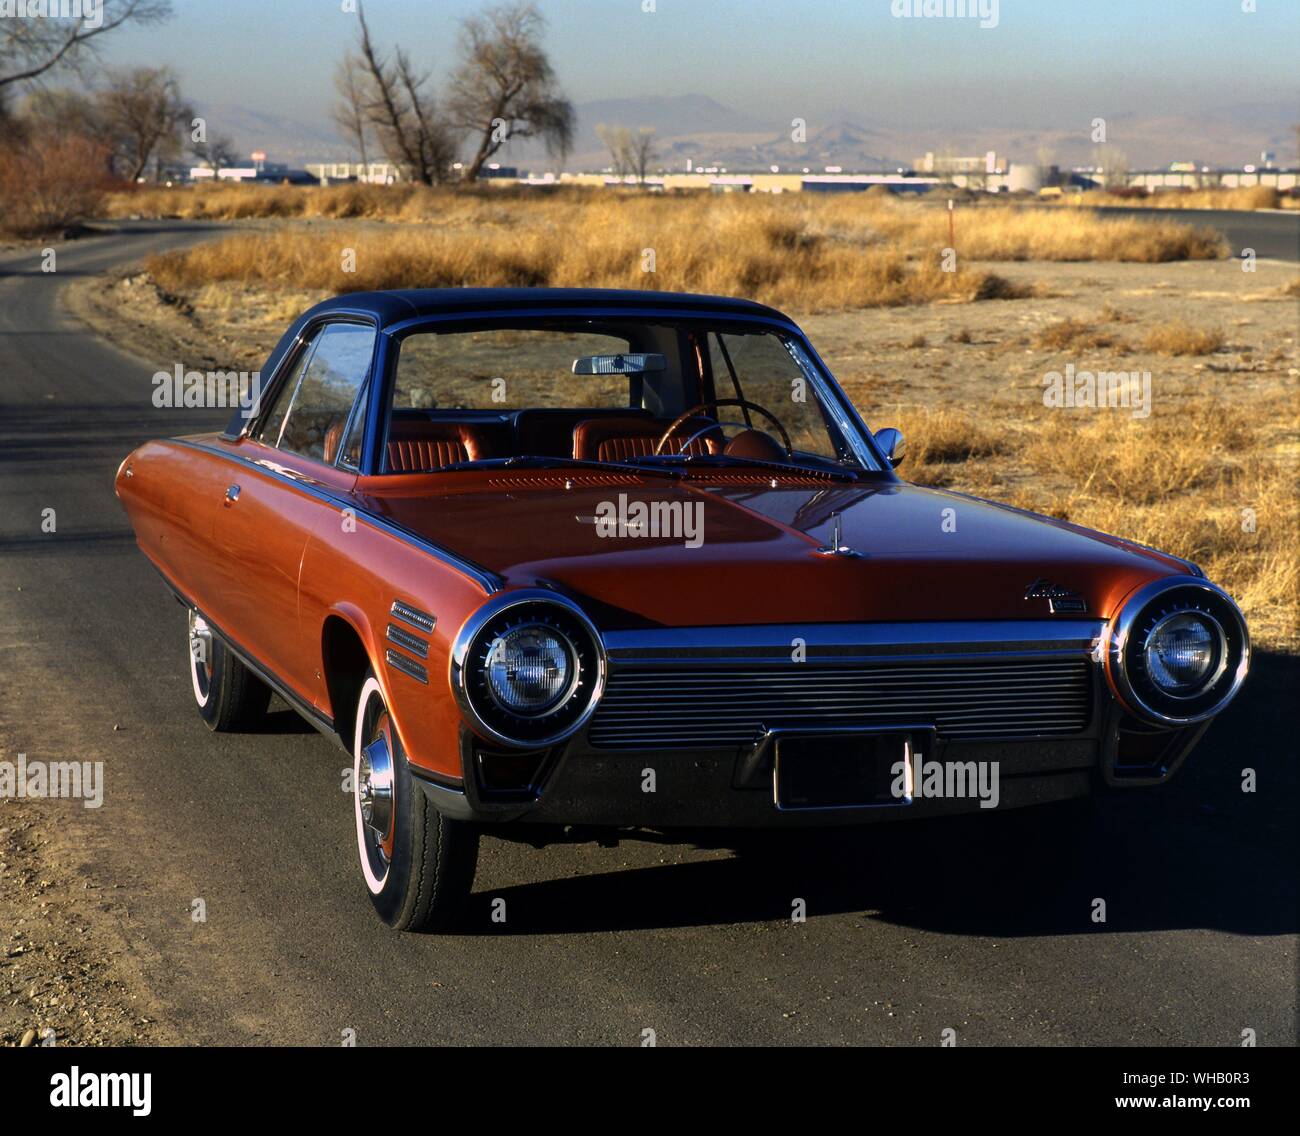 1963 Chrysler Turbine experimental engine: Turbine HP 130 body by Ghia of Italy. 50 made by Ghia. Given to selected members of public to drive under normal conditions. Once Chrysler had evaluated all but five were destroyed. Stock Photo